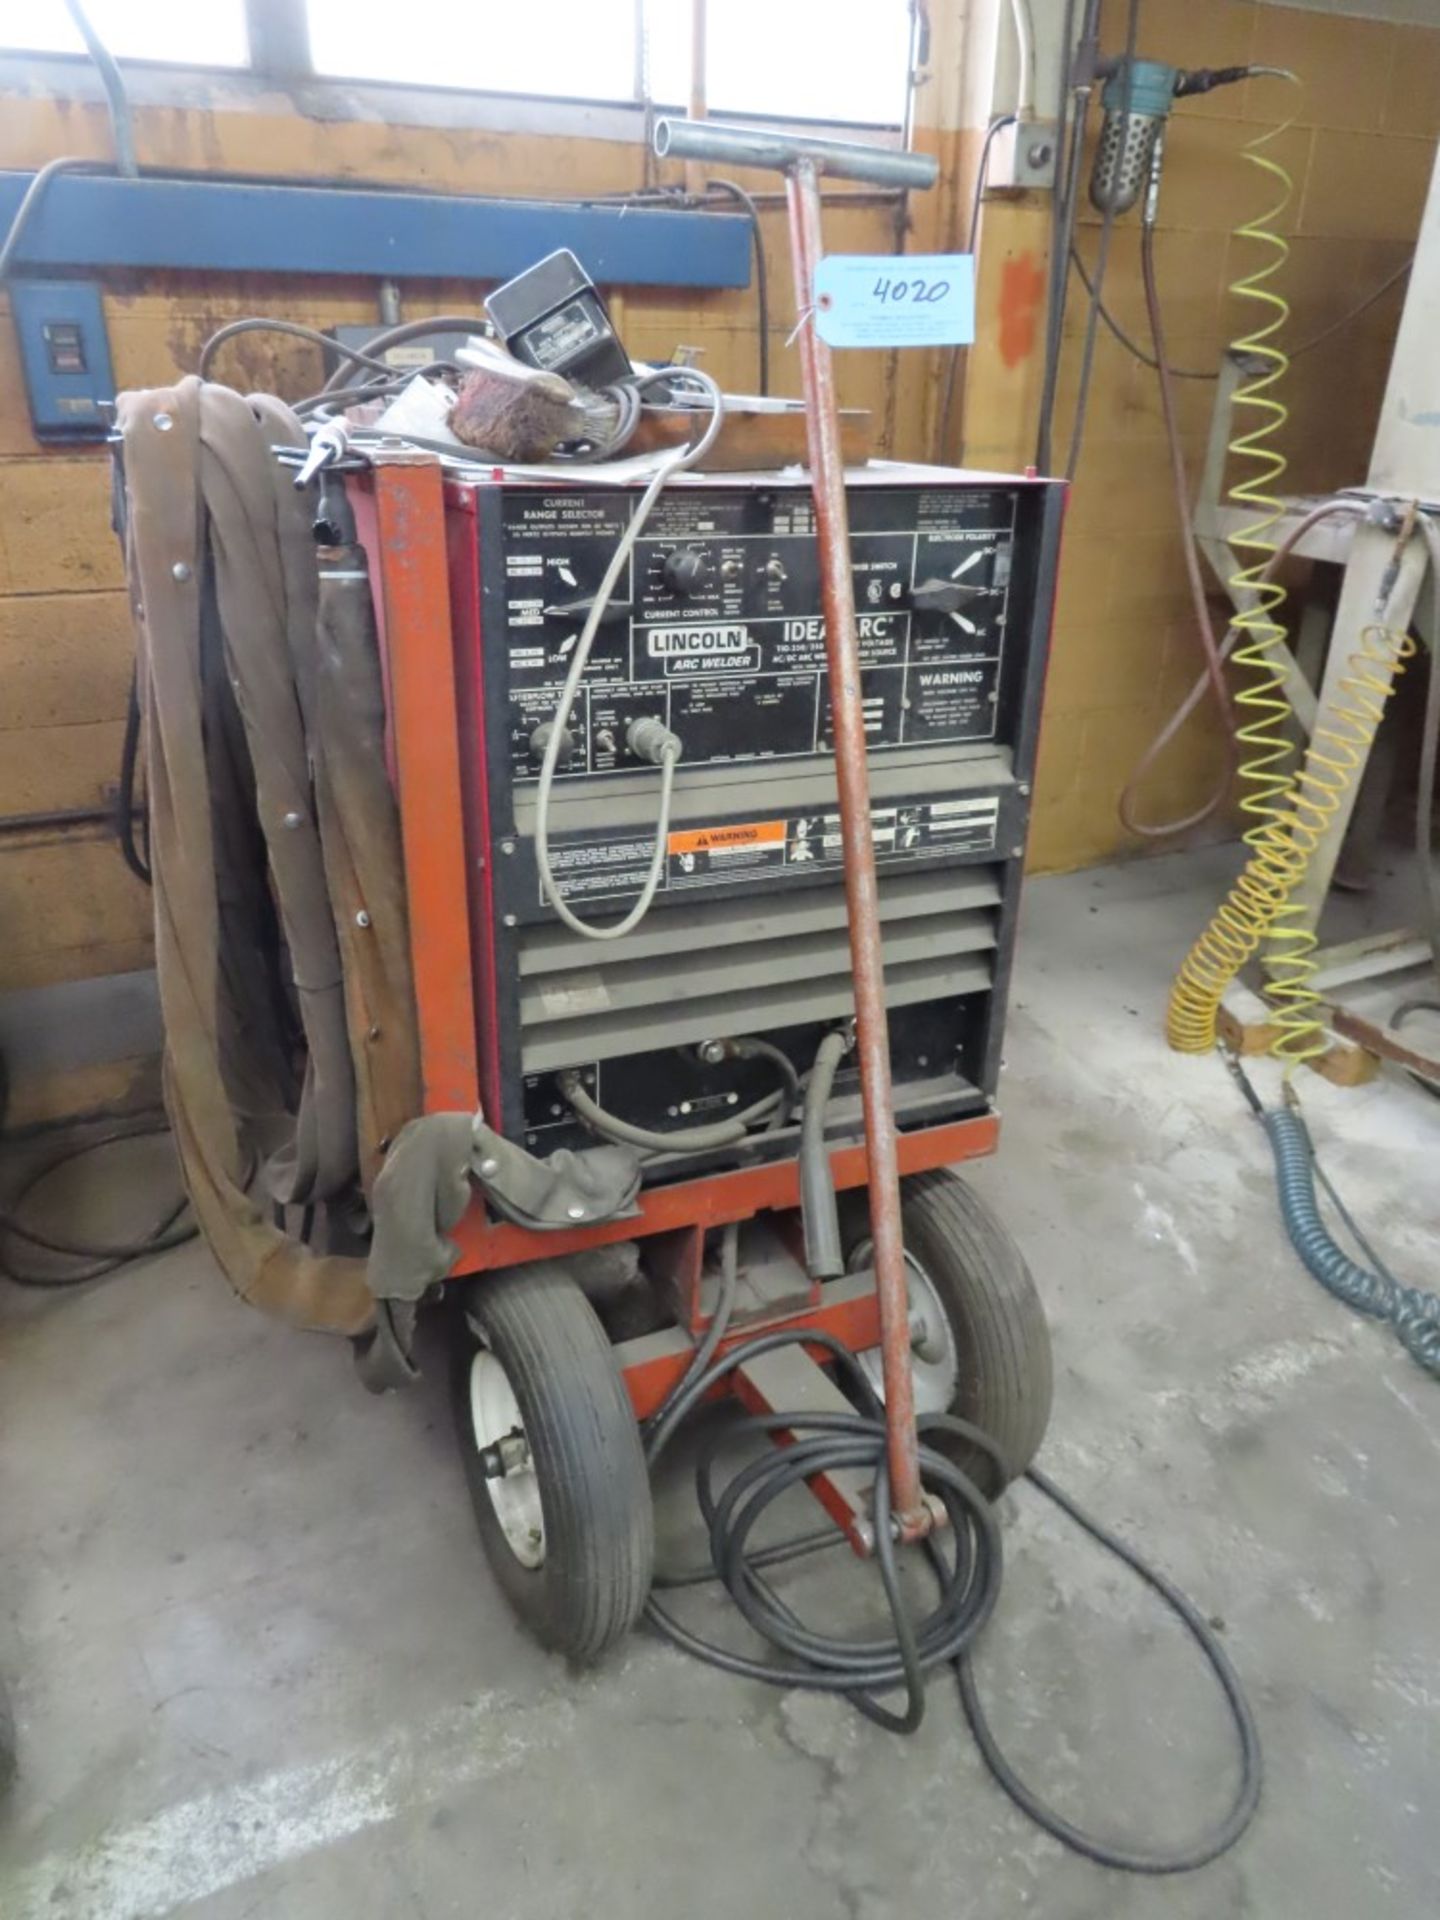 LINCOLN IDEALARC TIG 250/2500 VARIABLE VOLTAGE AC/DC ARC WELDING POWER SOURCE